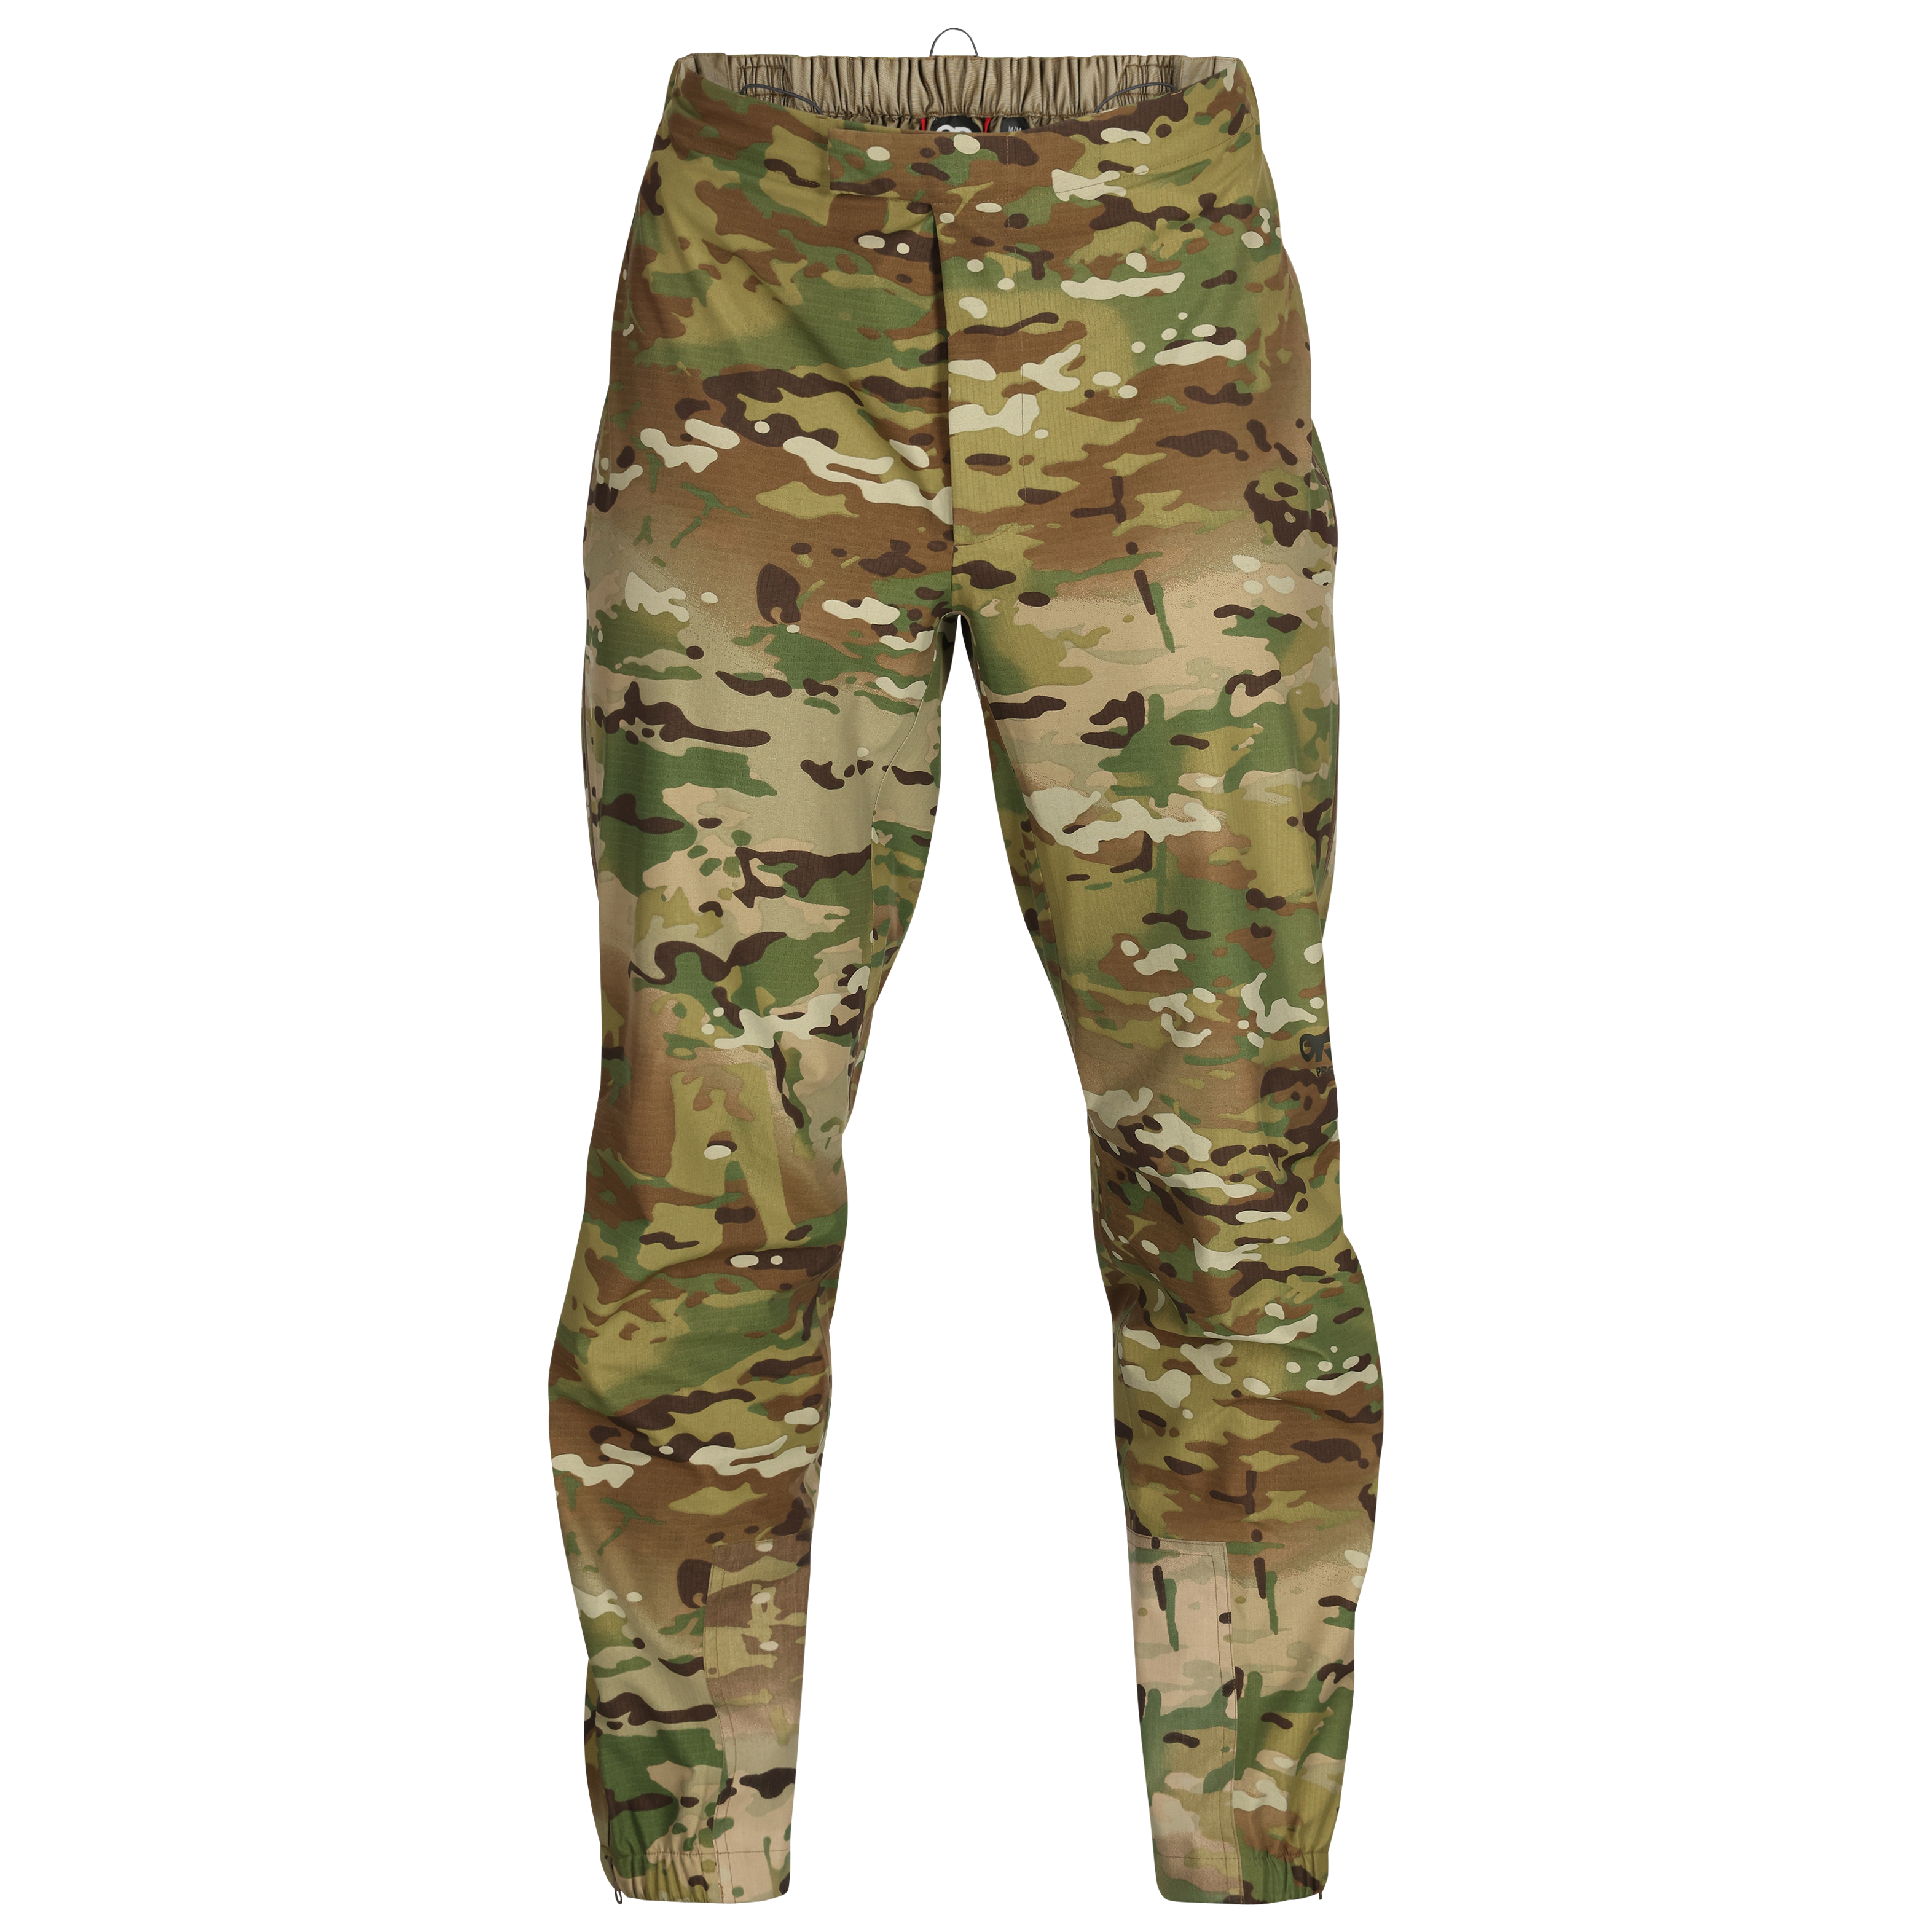 H World Shopping Military Army Tactical Airsoft Paintball Shooting Pants  Combat Men Pants with Knee Pads : Amazon.in: Sports, Fitness & Outdoors